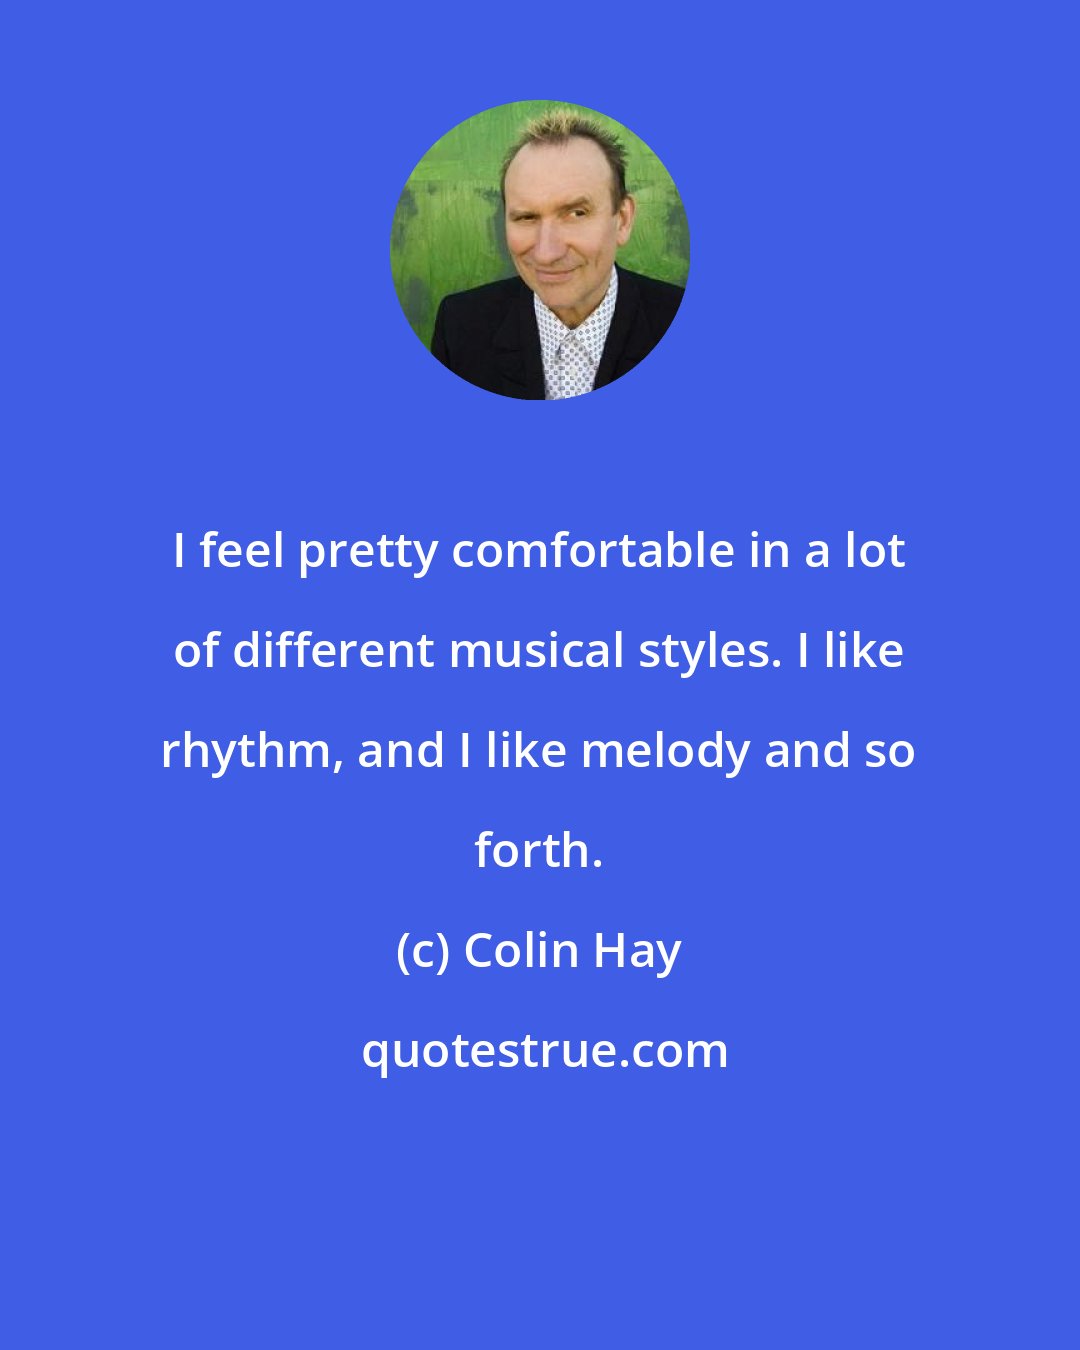 Colin Hay: I feel pretty comfortable in a lot of different musical styles. I like rhythm, and I like melody and so forth.